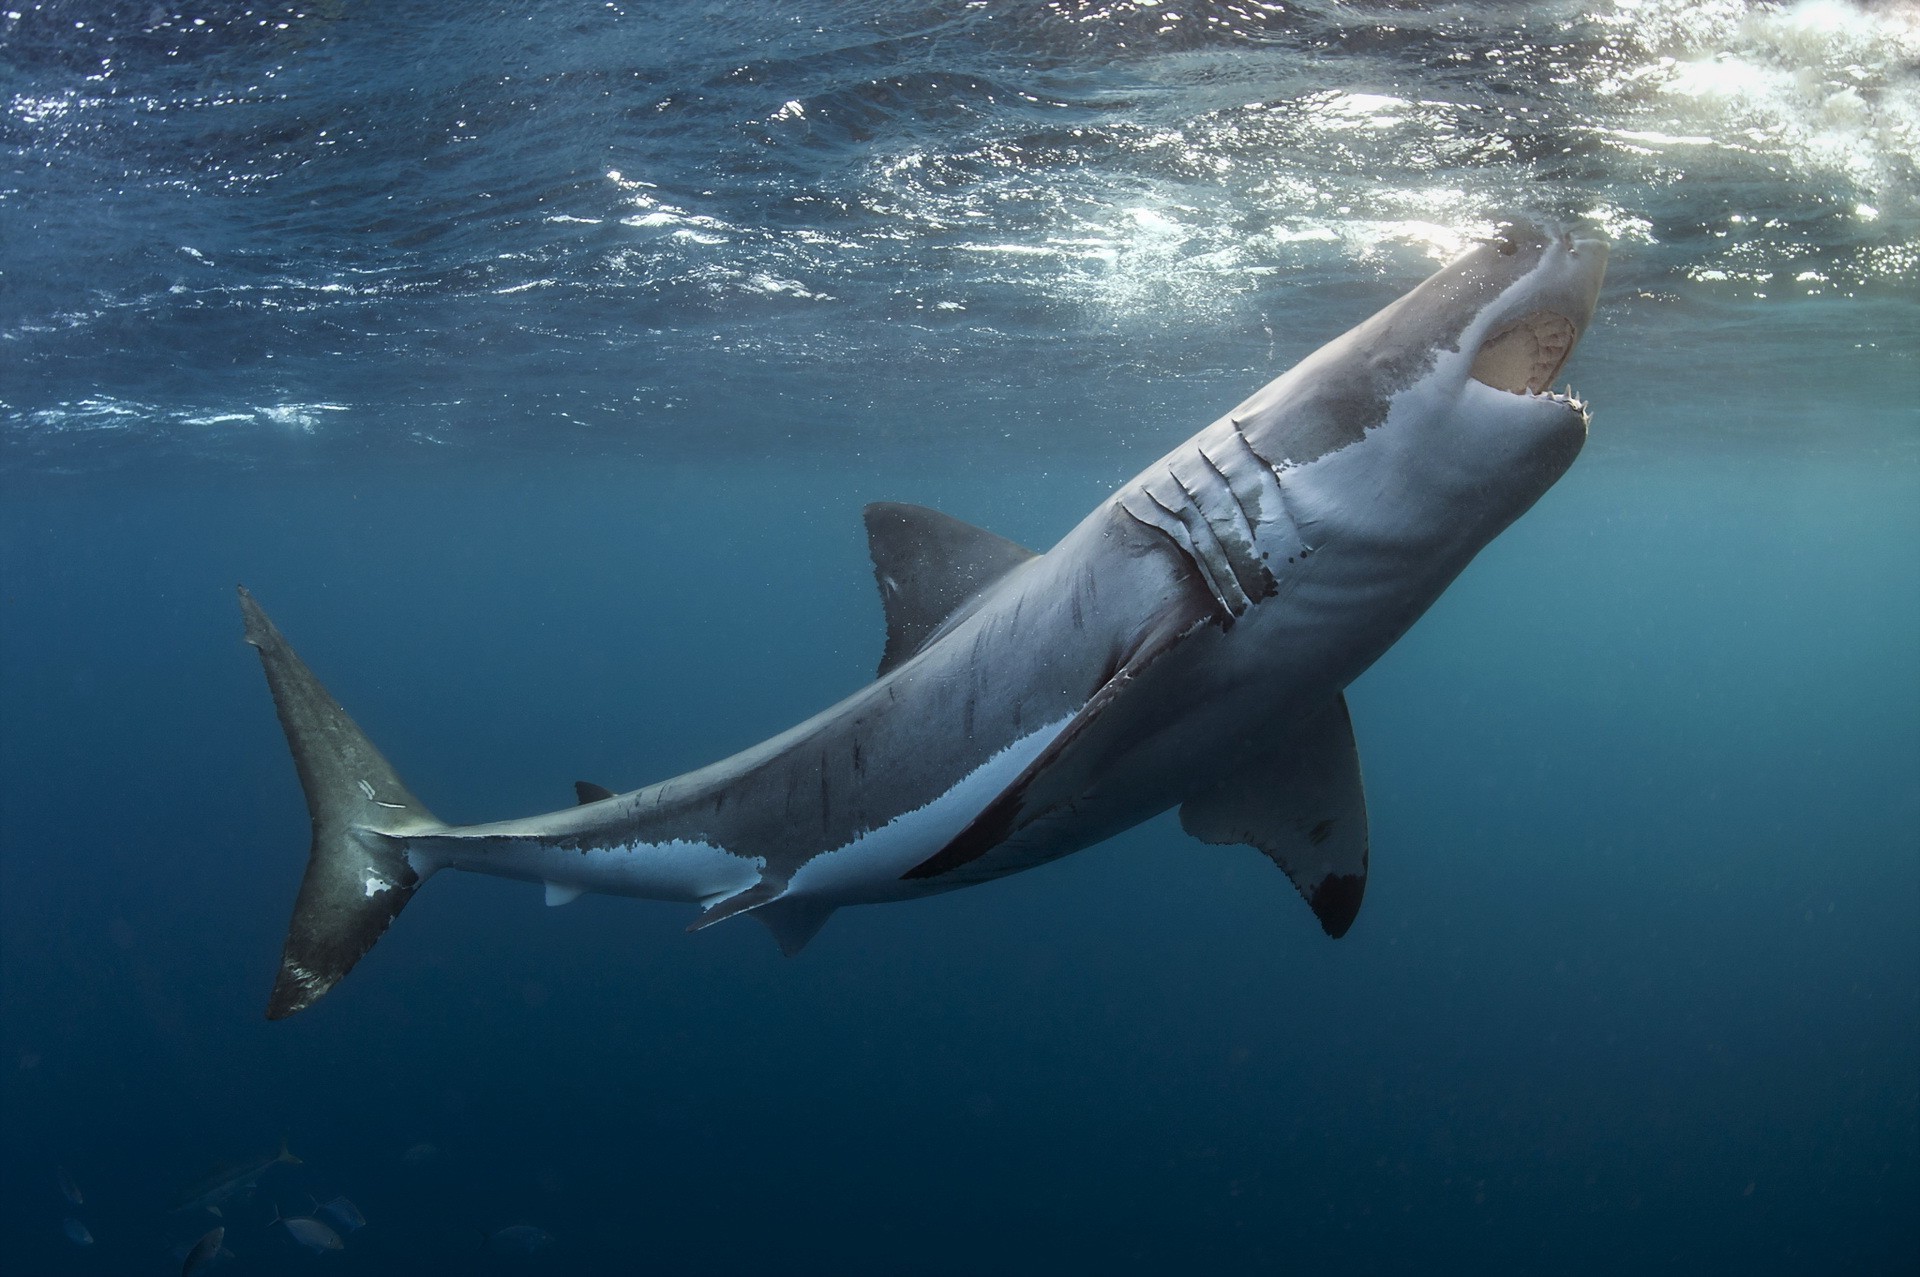 1920x1277 High Definition Wallpapers|Cool Nature Wallpapers | This Blog ... Shark ...